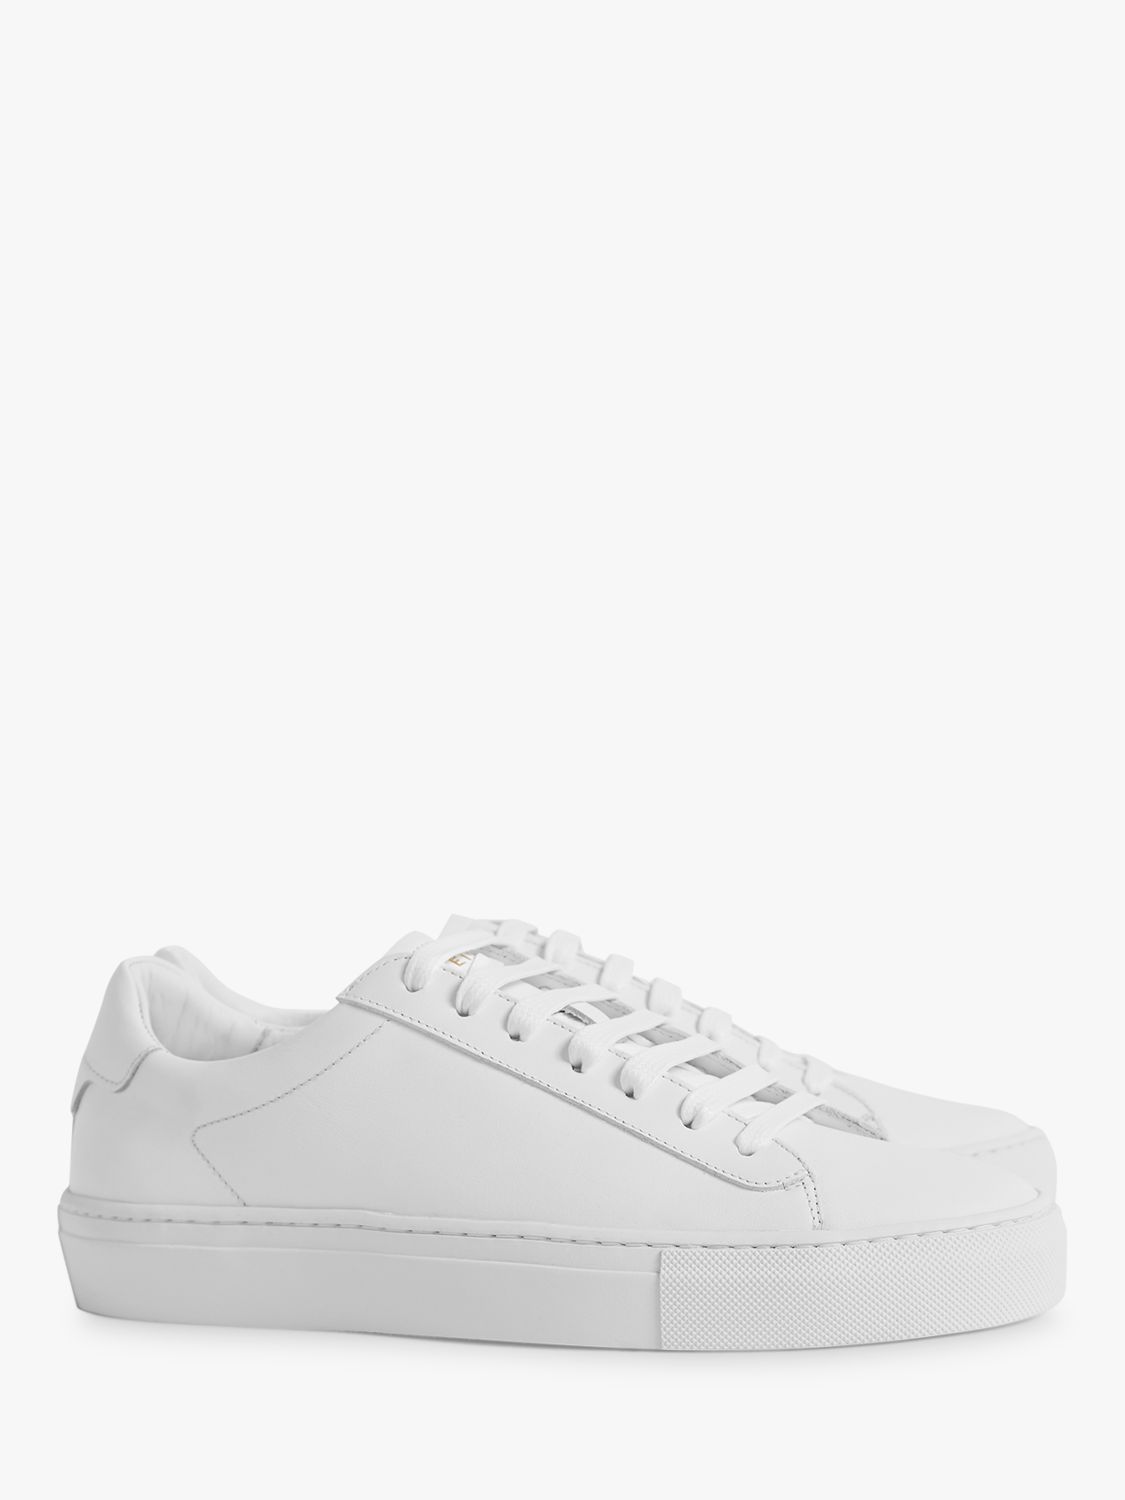 Reiss Finley Leather Trainers, White, 3